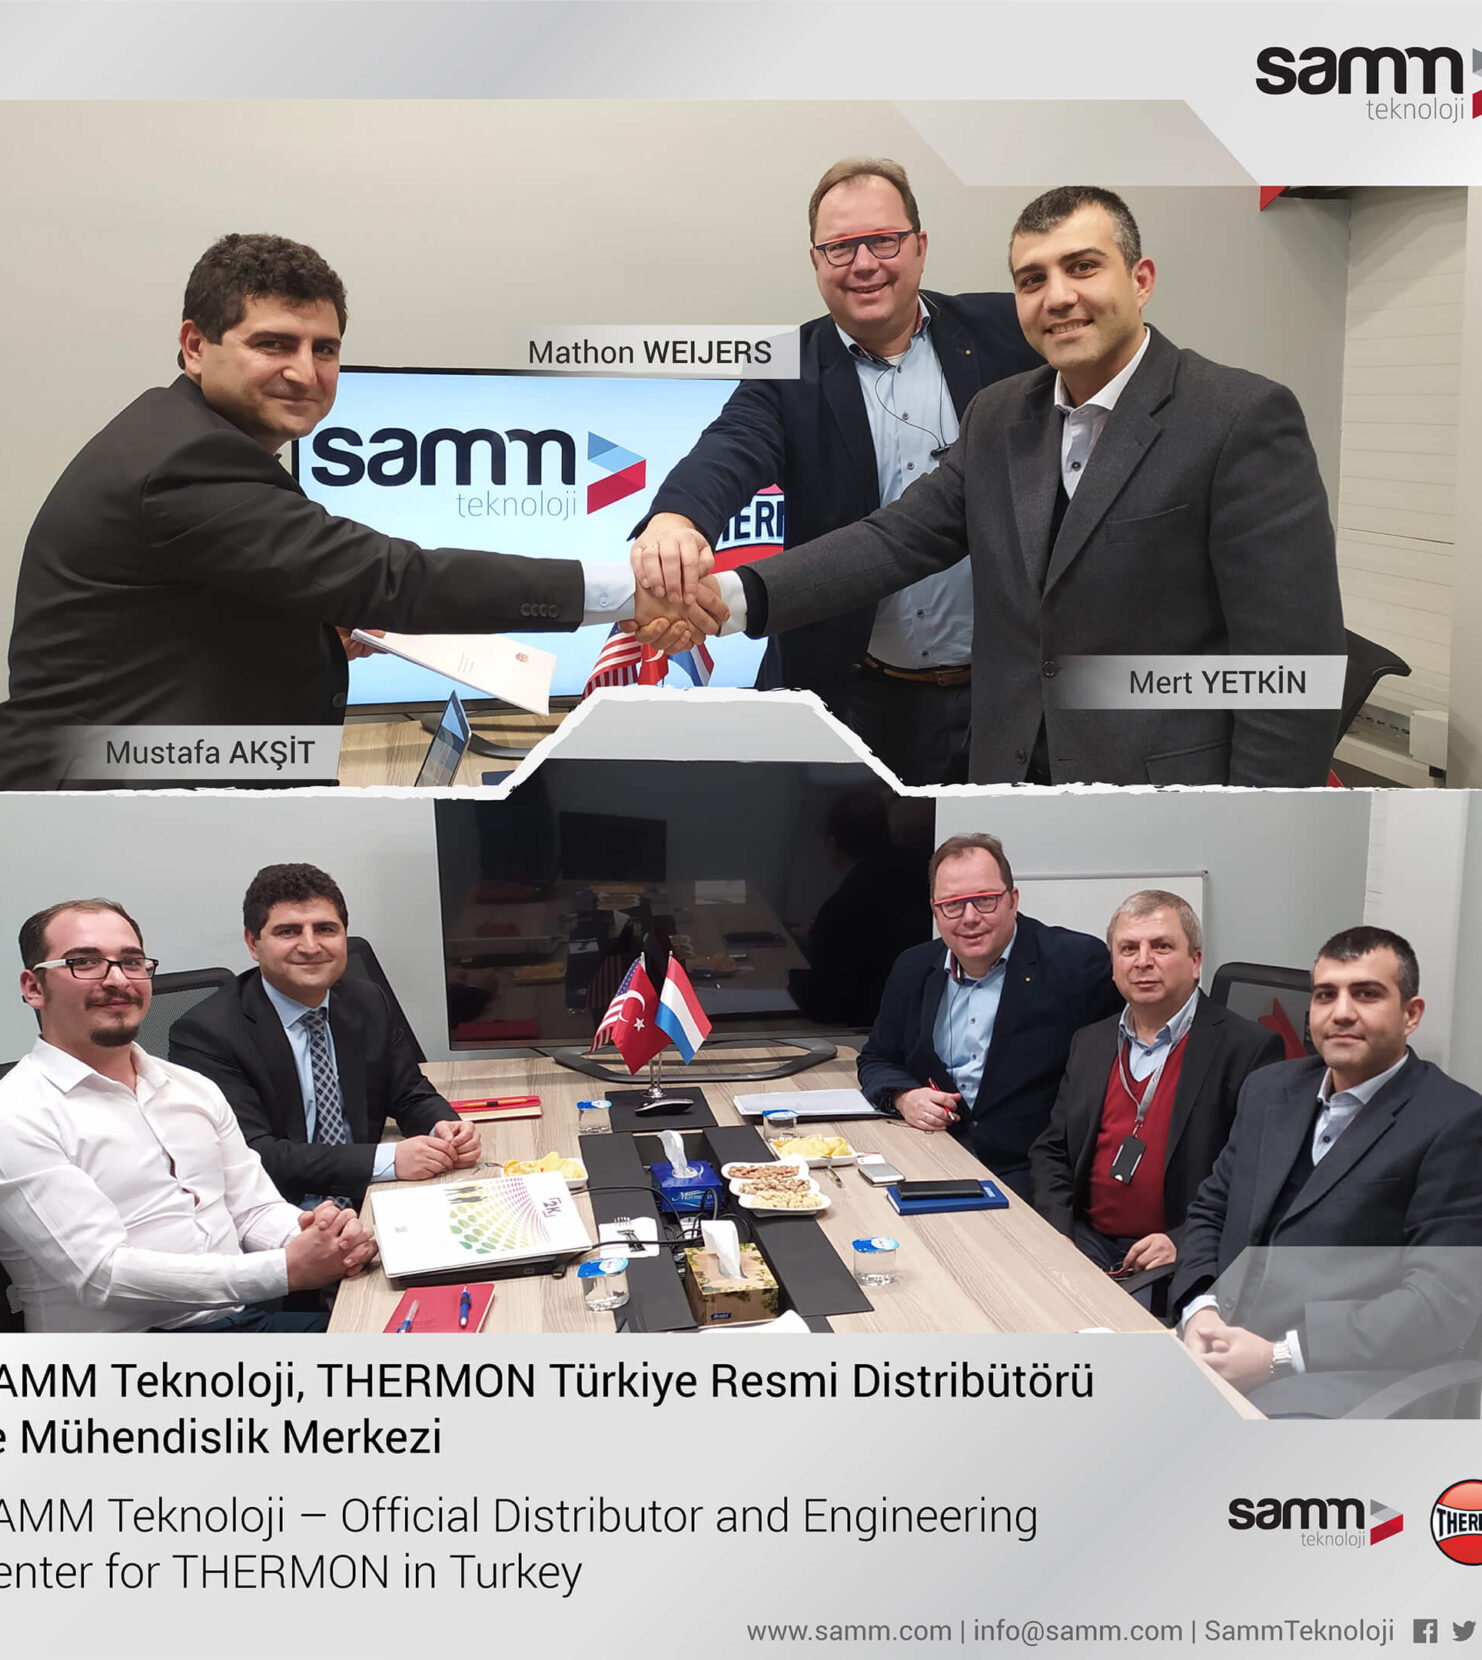 The Official Distributor and Engineering Center for Thermon in Turkey